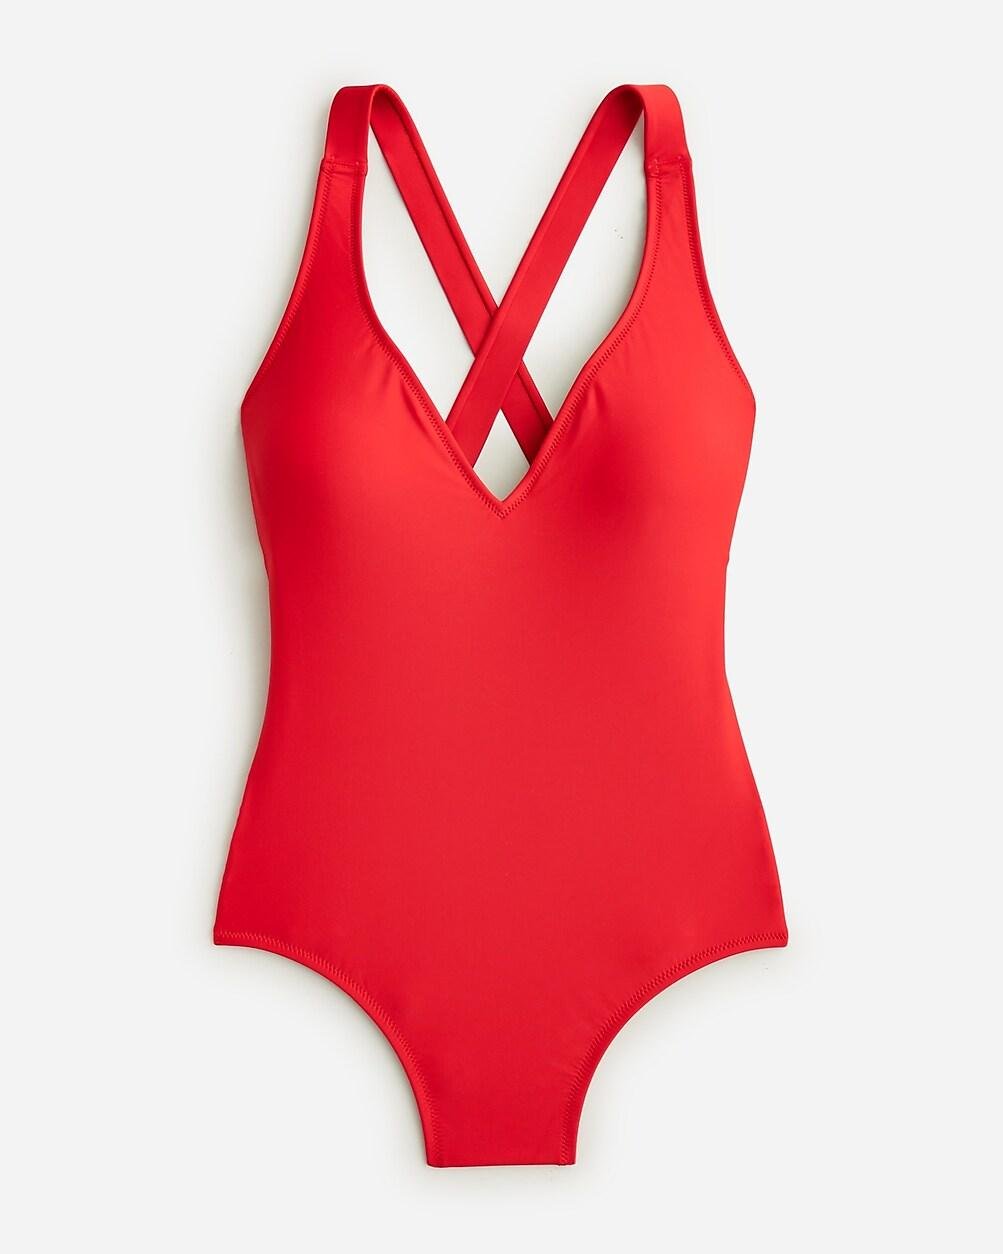 High-support cross-back one-piece by J.CREW